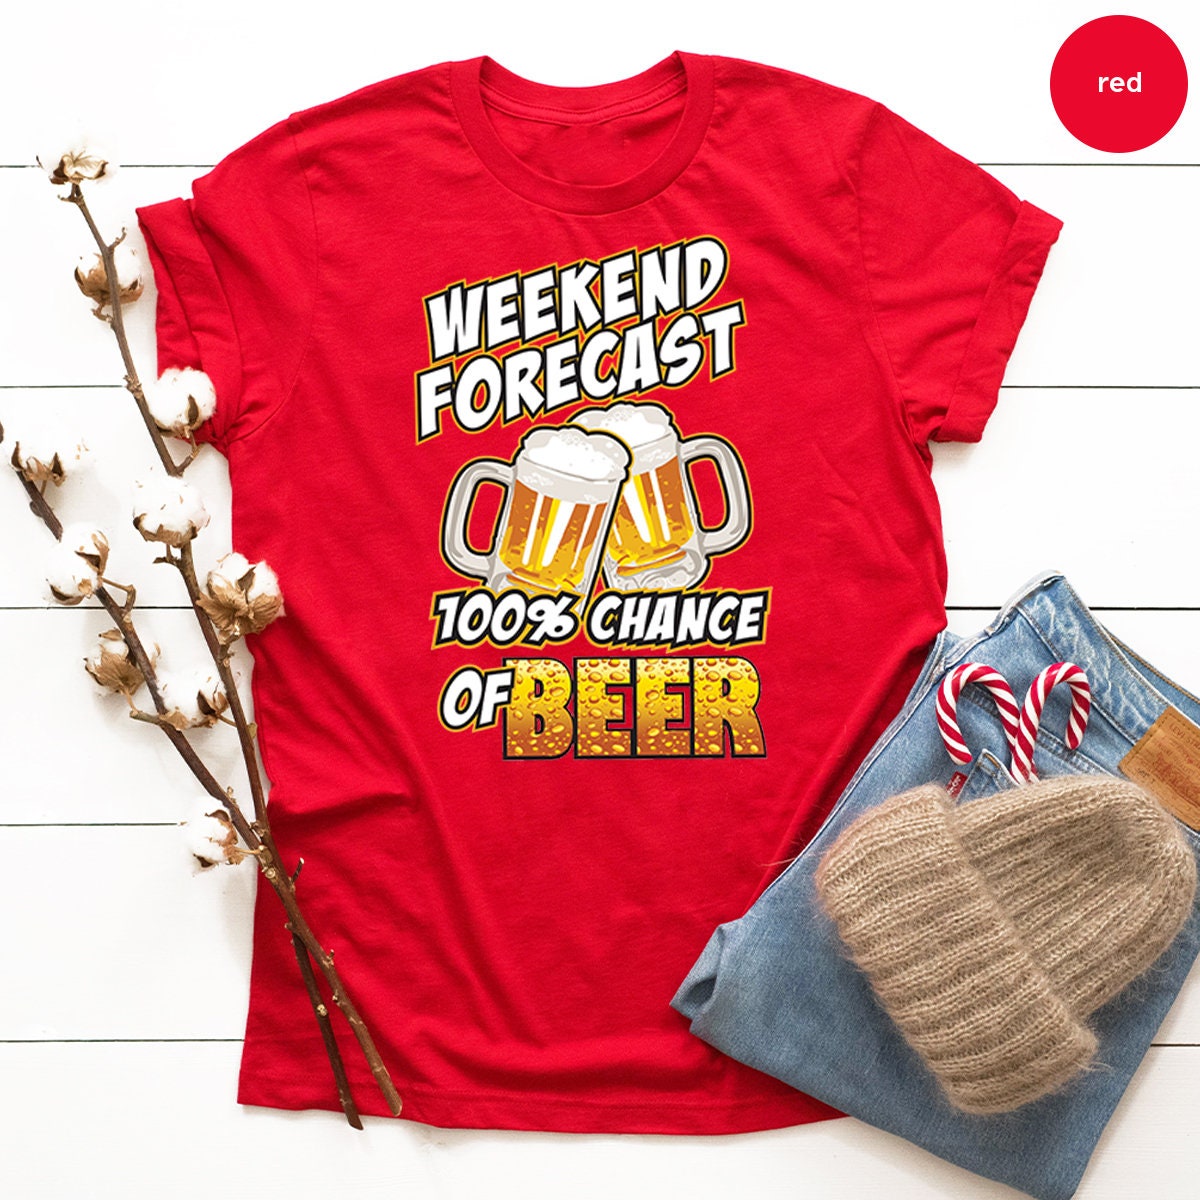 Beer Shirt, Day Drinking Shirt, Beer T Shirt, Funny Quote Shirt, Weekend Forecast Chance Of Beer Shirt, Alcohol Shirt, Bachelor Party Shirt - Fastdeliverytees.com